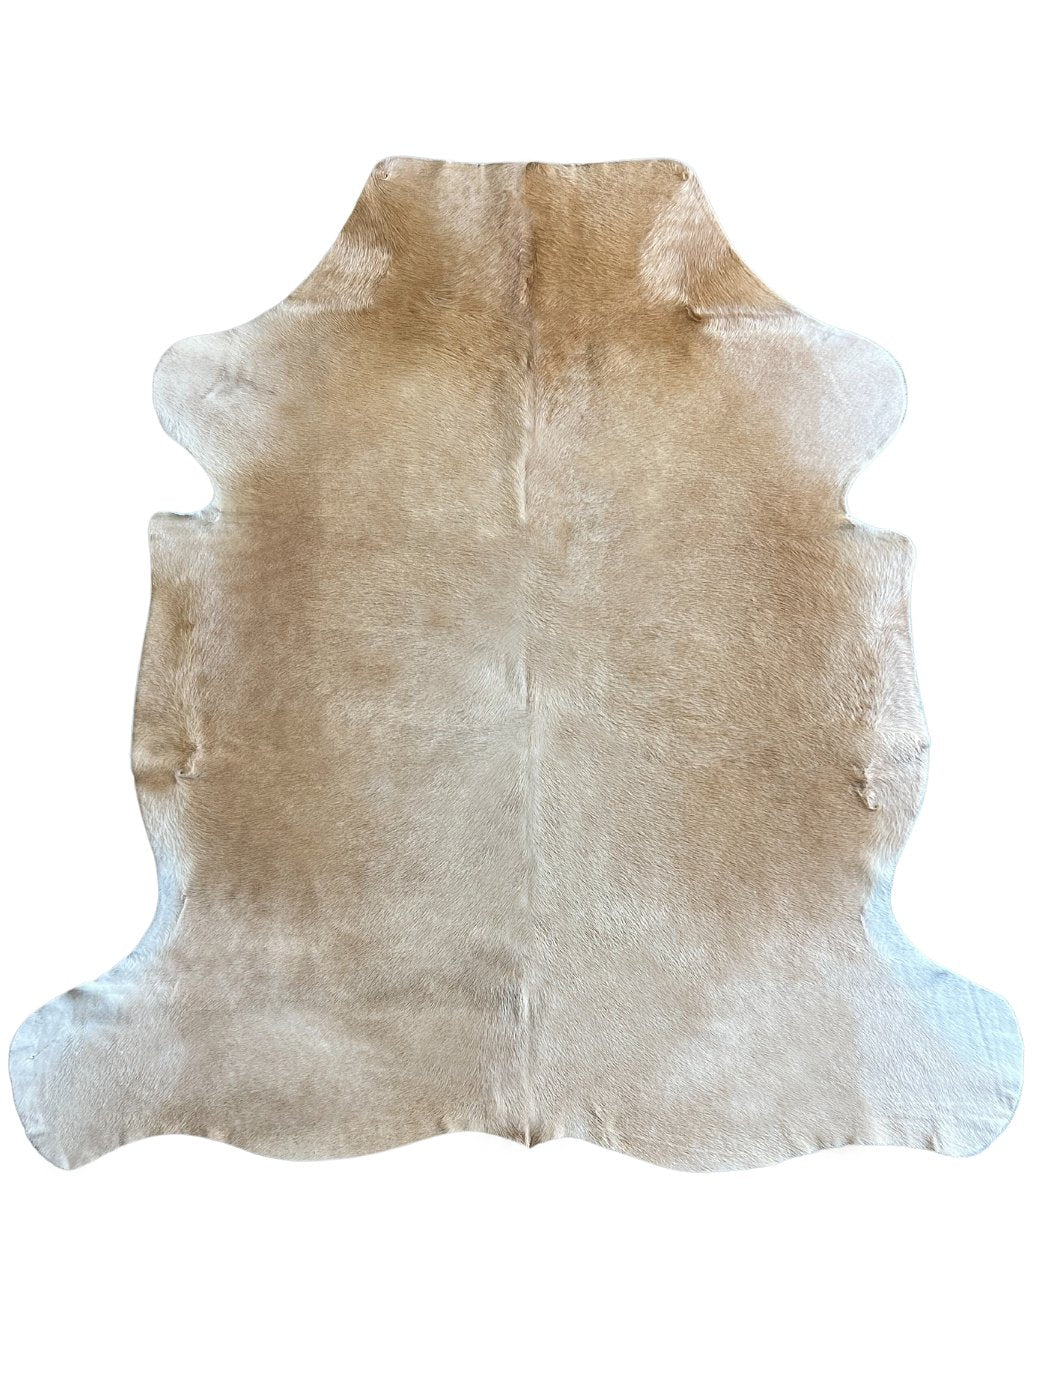 Genuine Beige and White Cowhide Rug - Hides & Leather Store - By Trahide - Cowhide Rugs